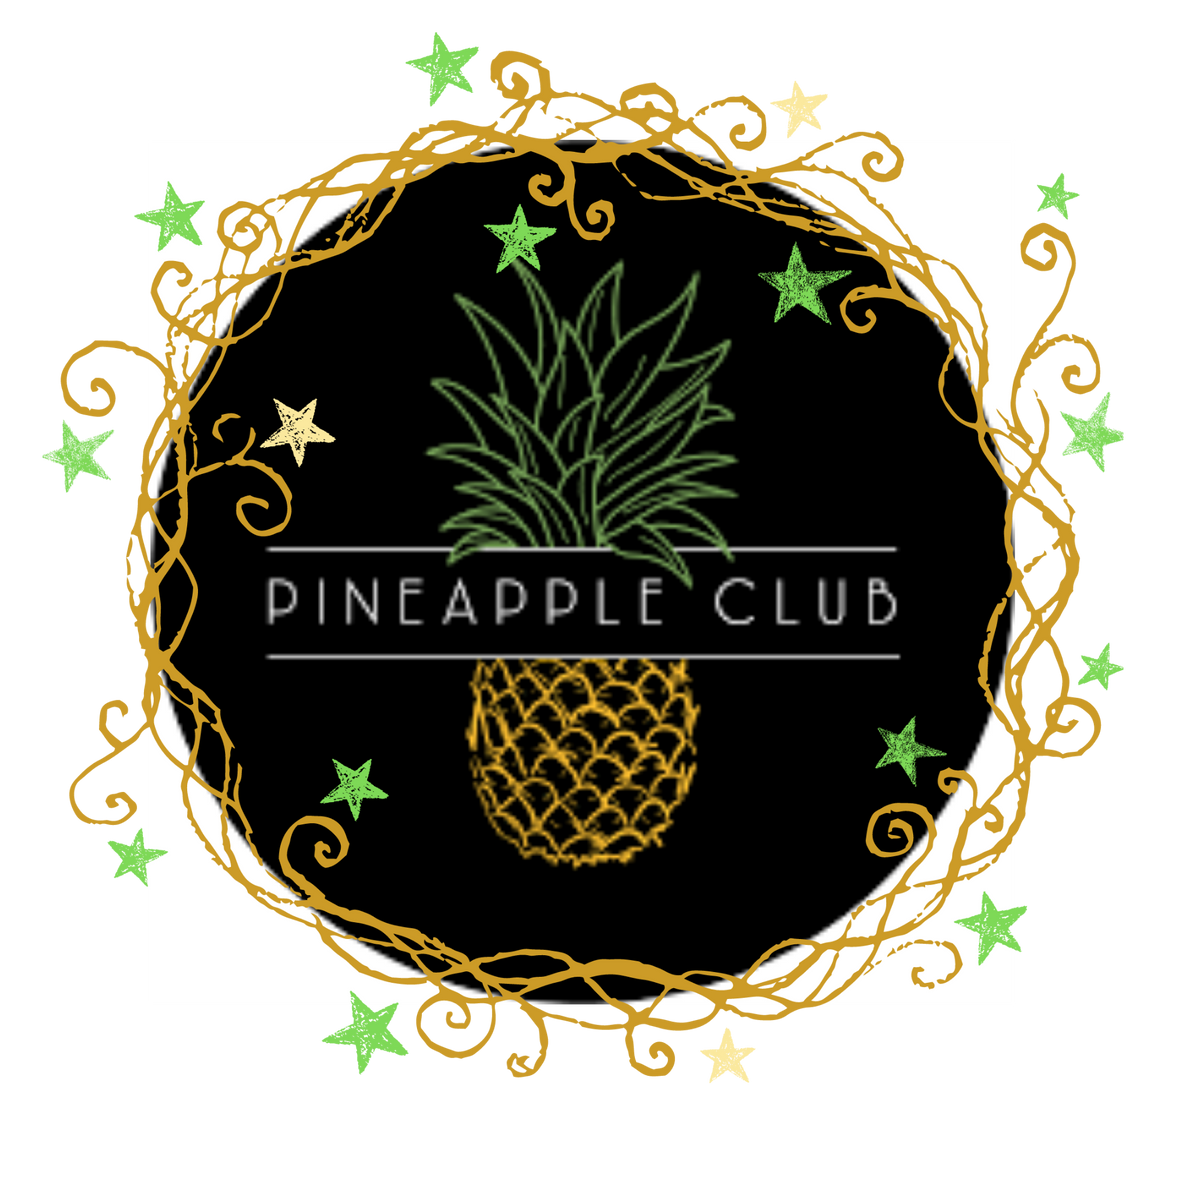 JOIN THE PINEAPPLE CLUB!  